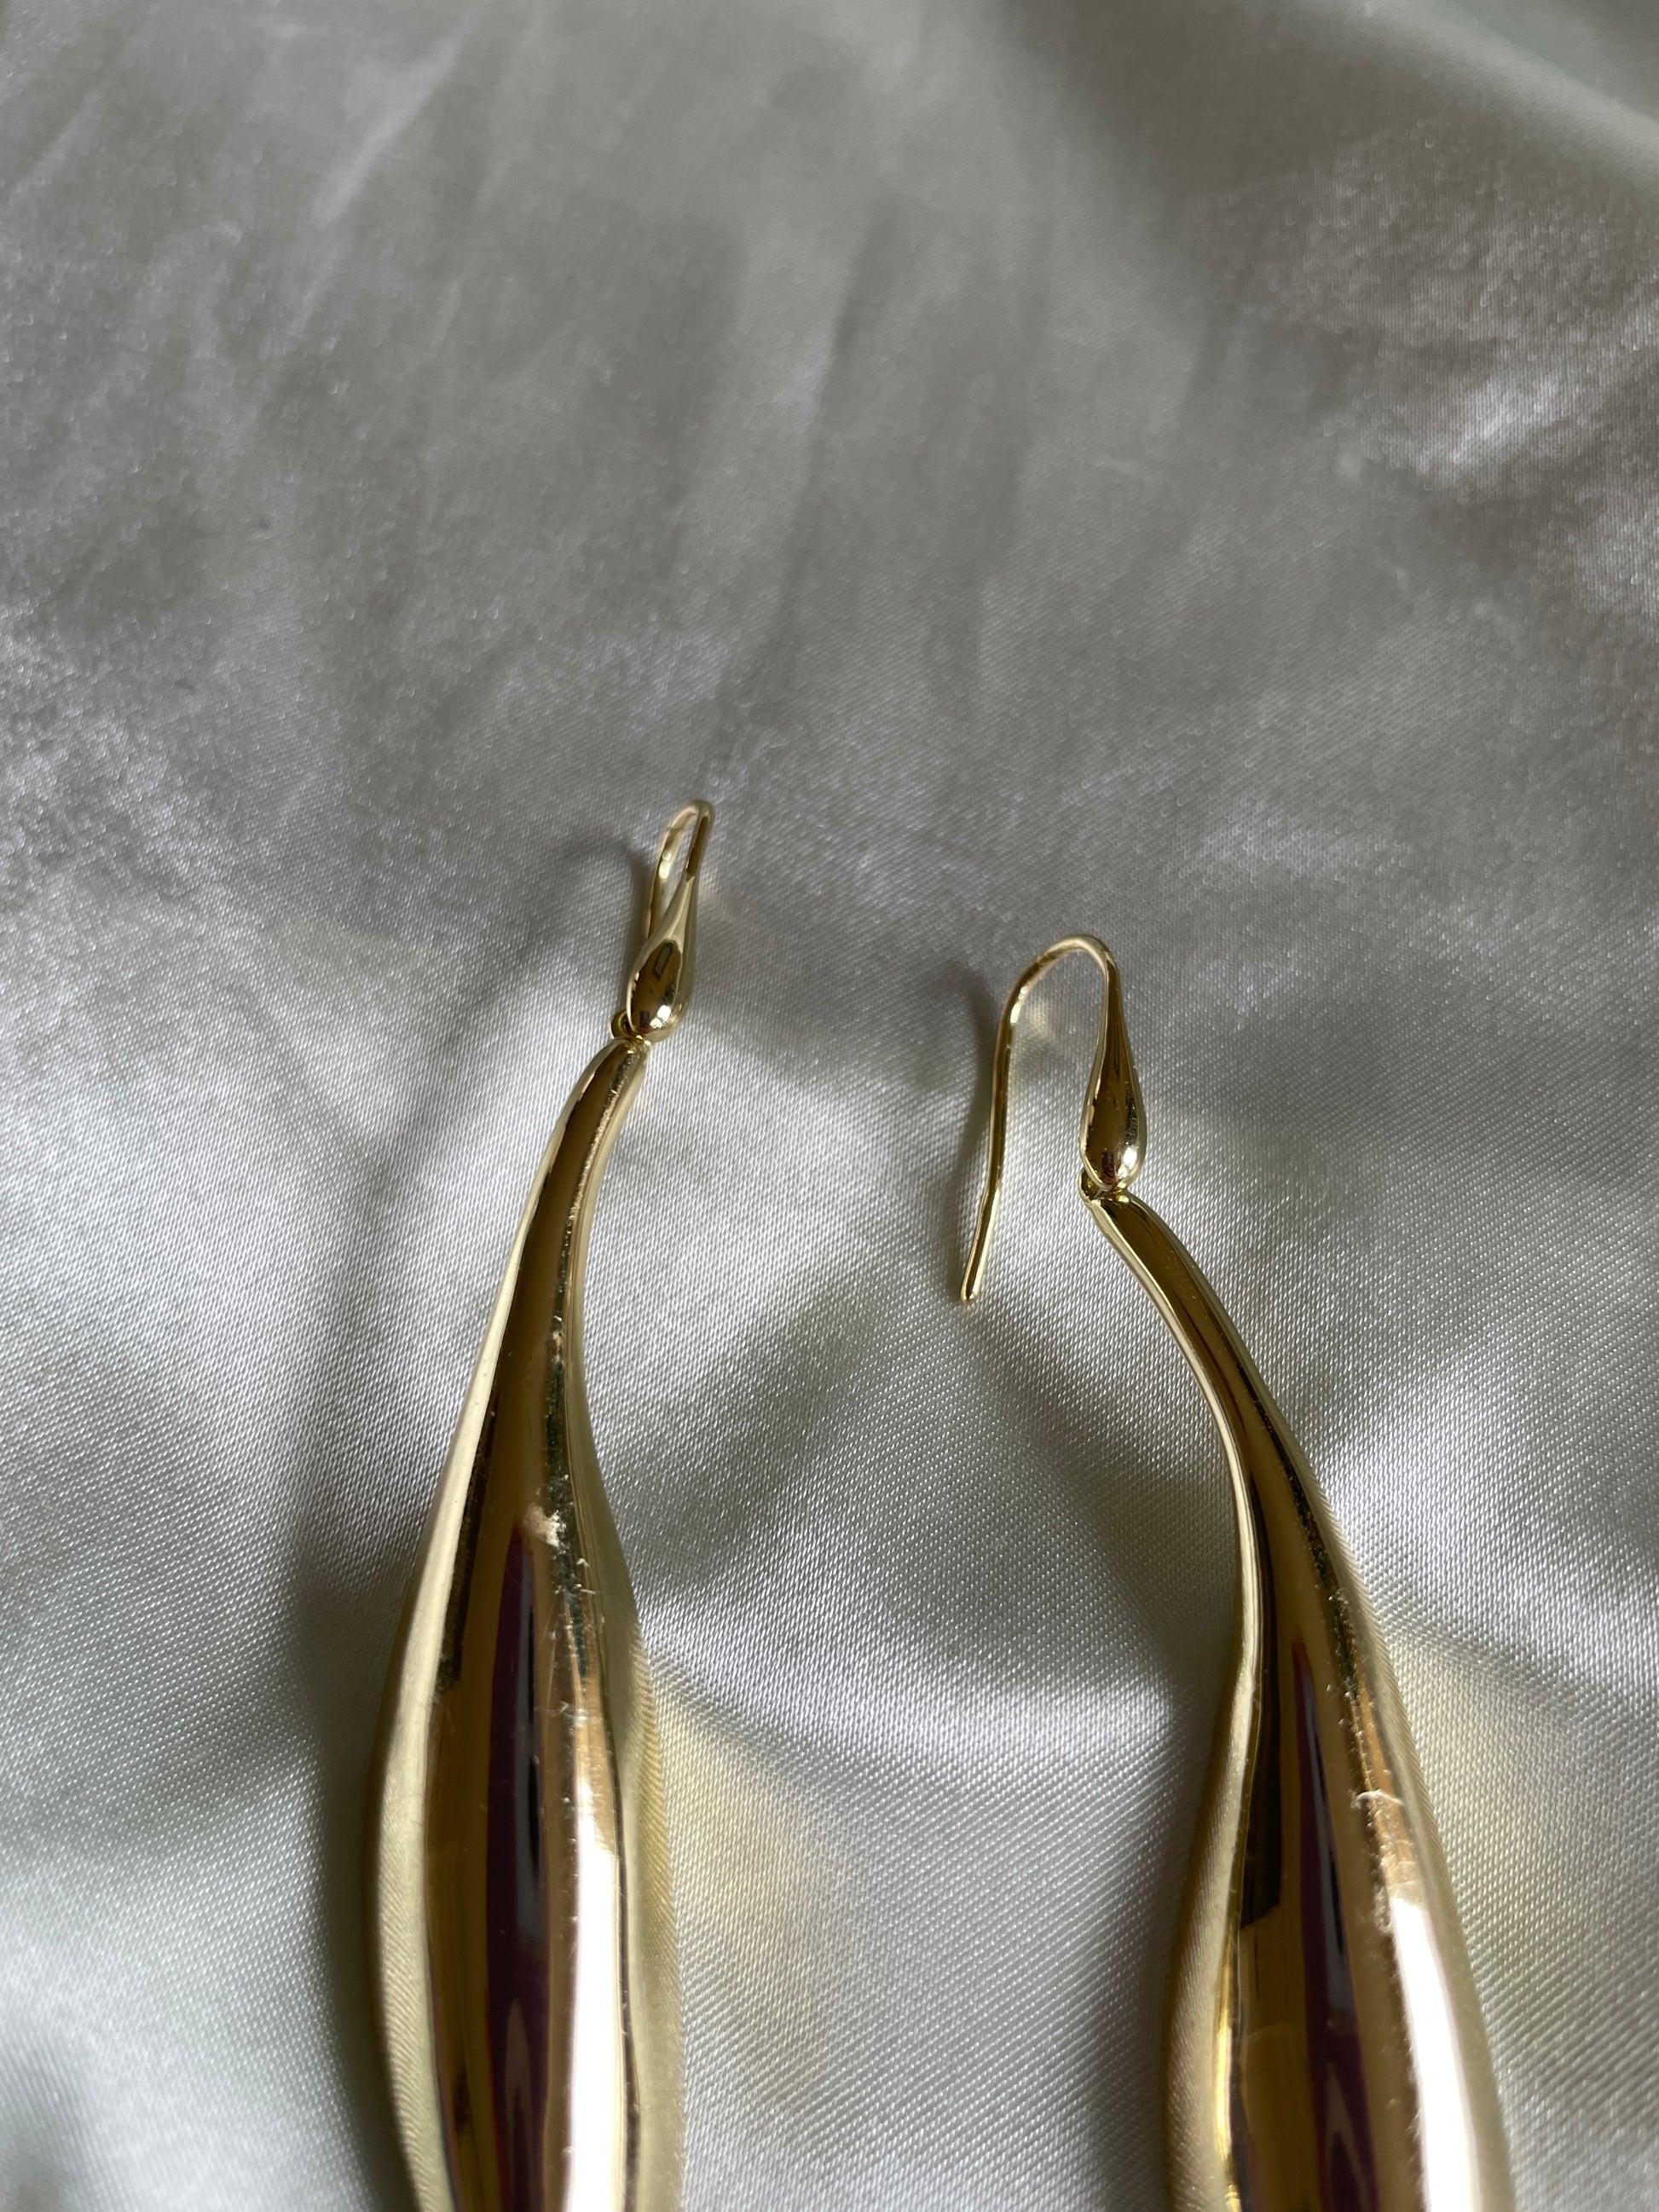  2000s Gold Plated Contemporary Pierced Earrings